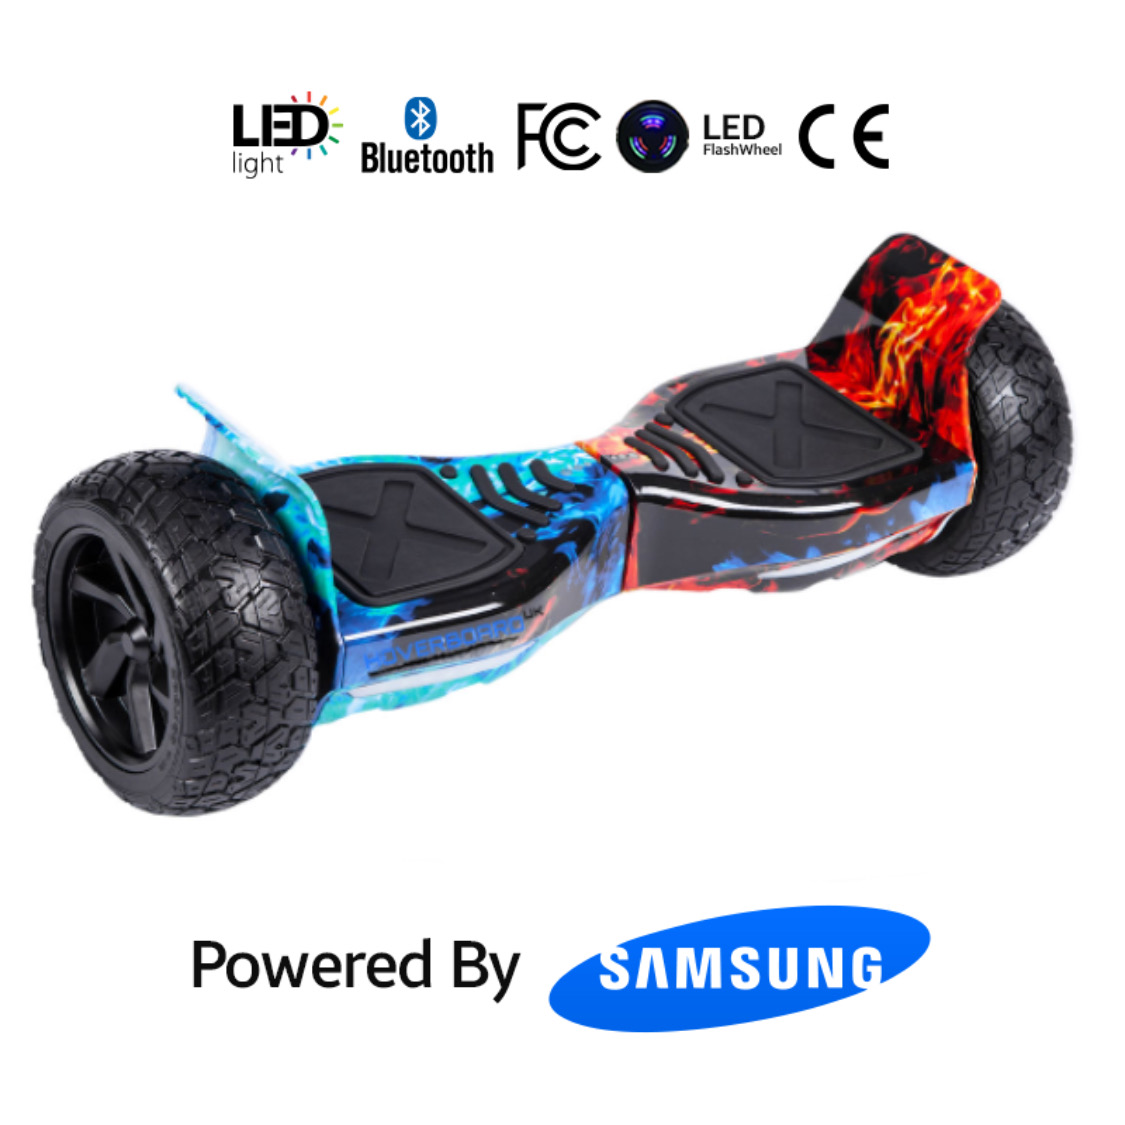 Red Galaxy Hummer Hoverboard